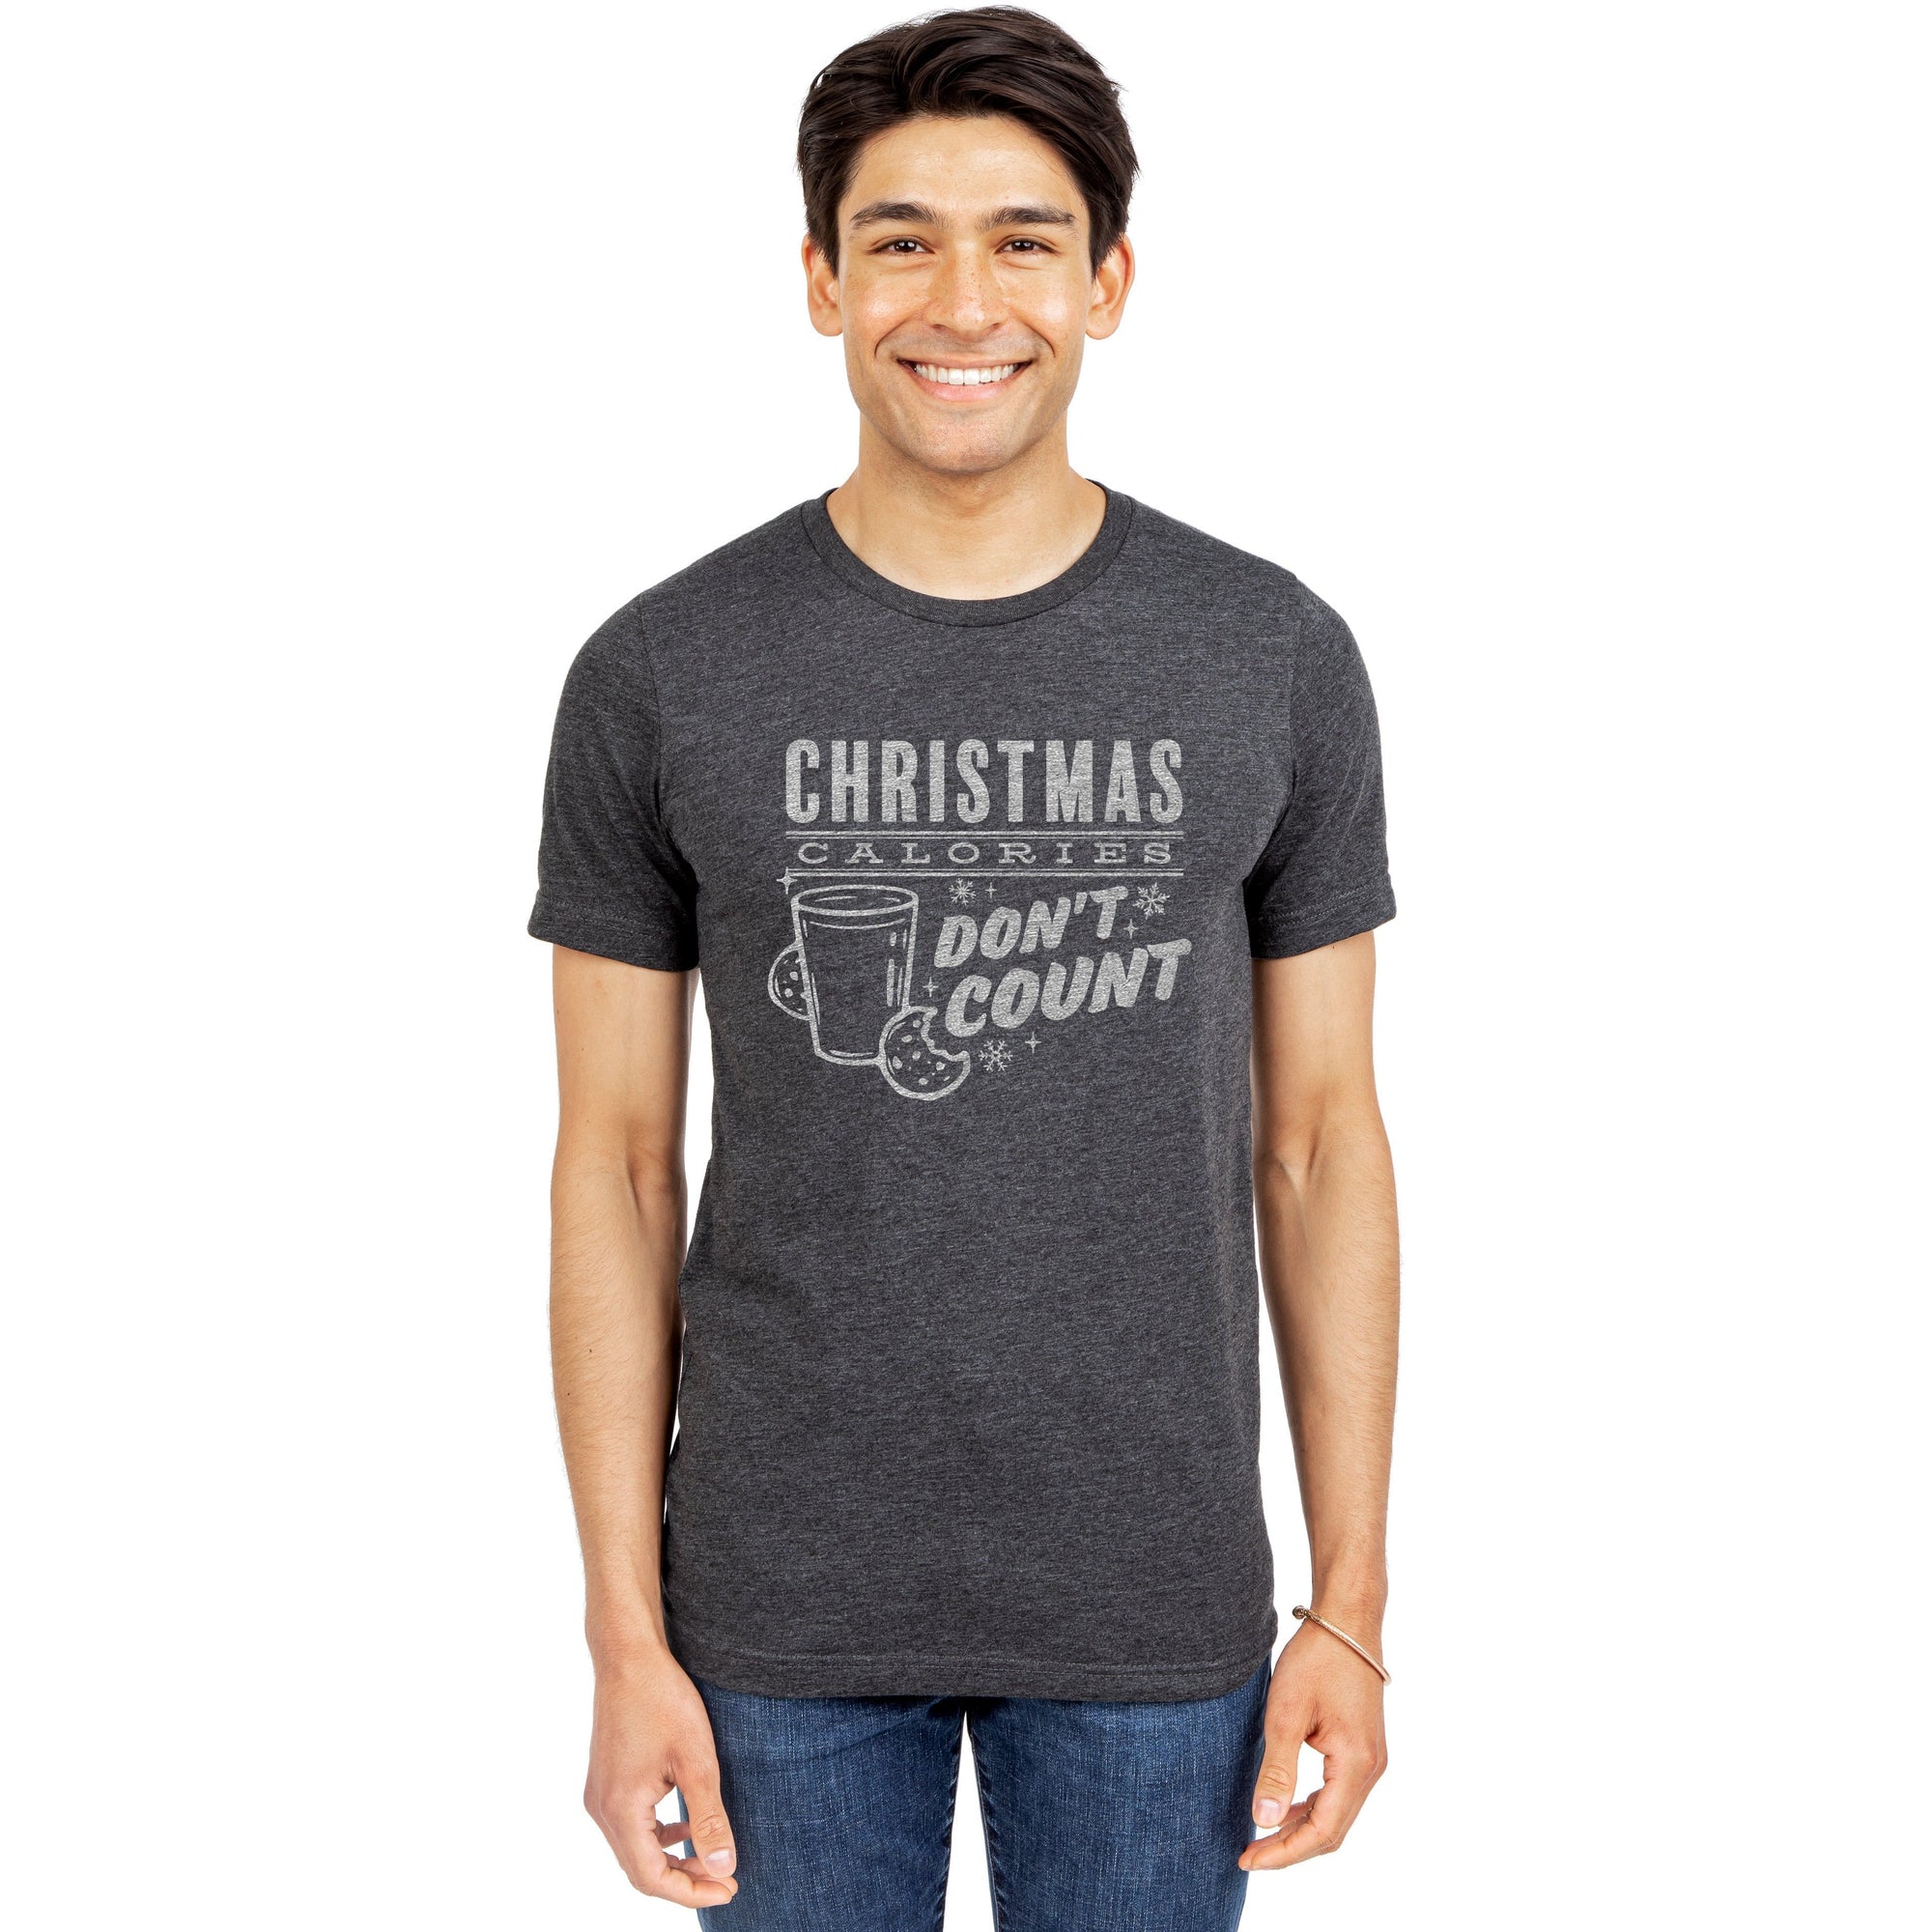 Christmas Calories Don't Count Charcoal Printed Graphic Men's Crew T-Shirt Tee Model